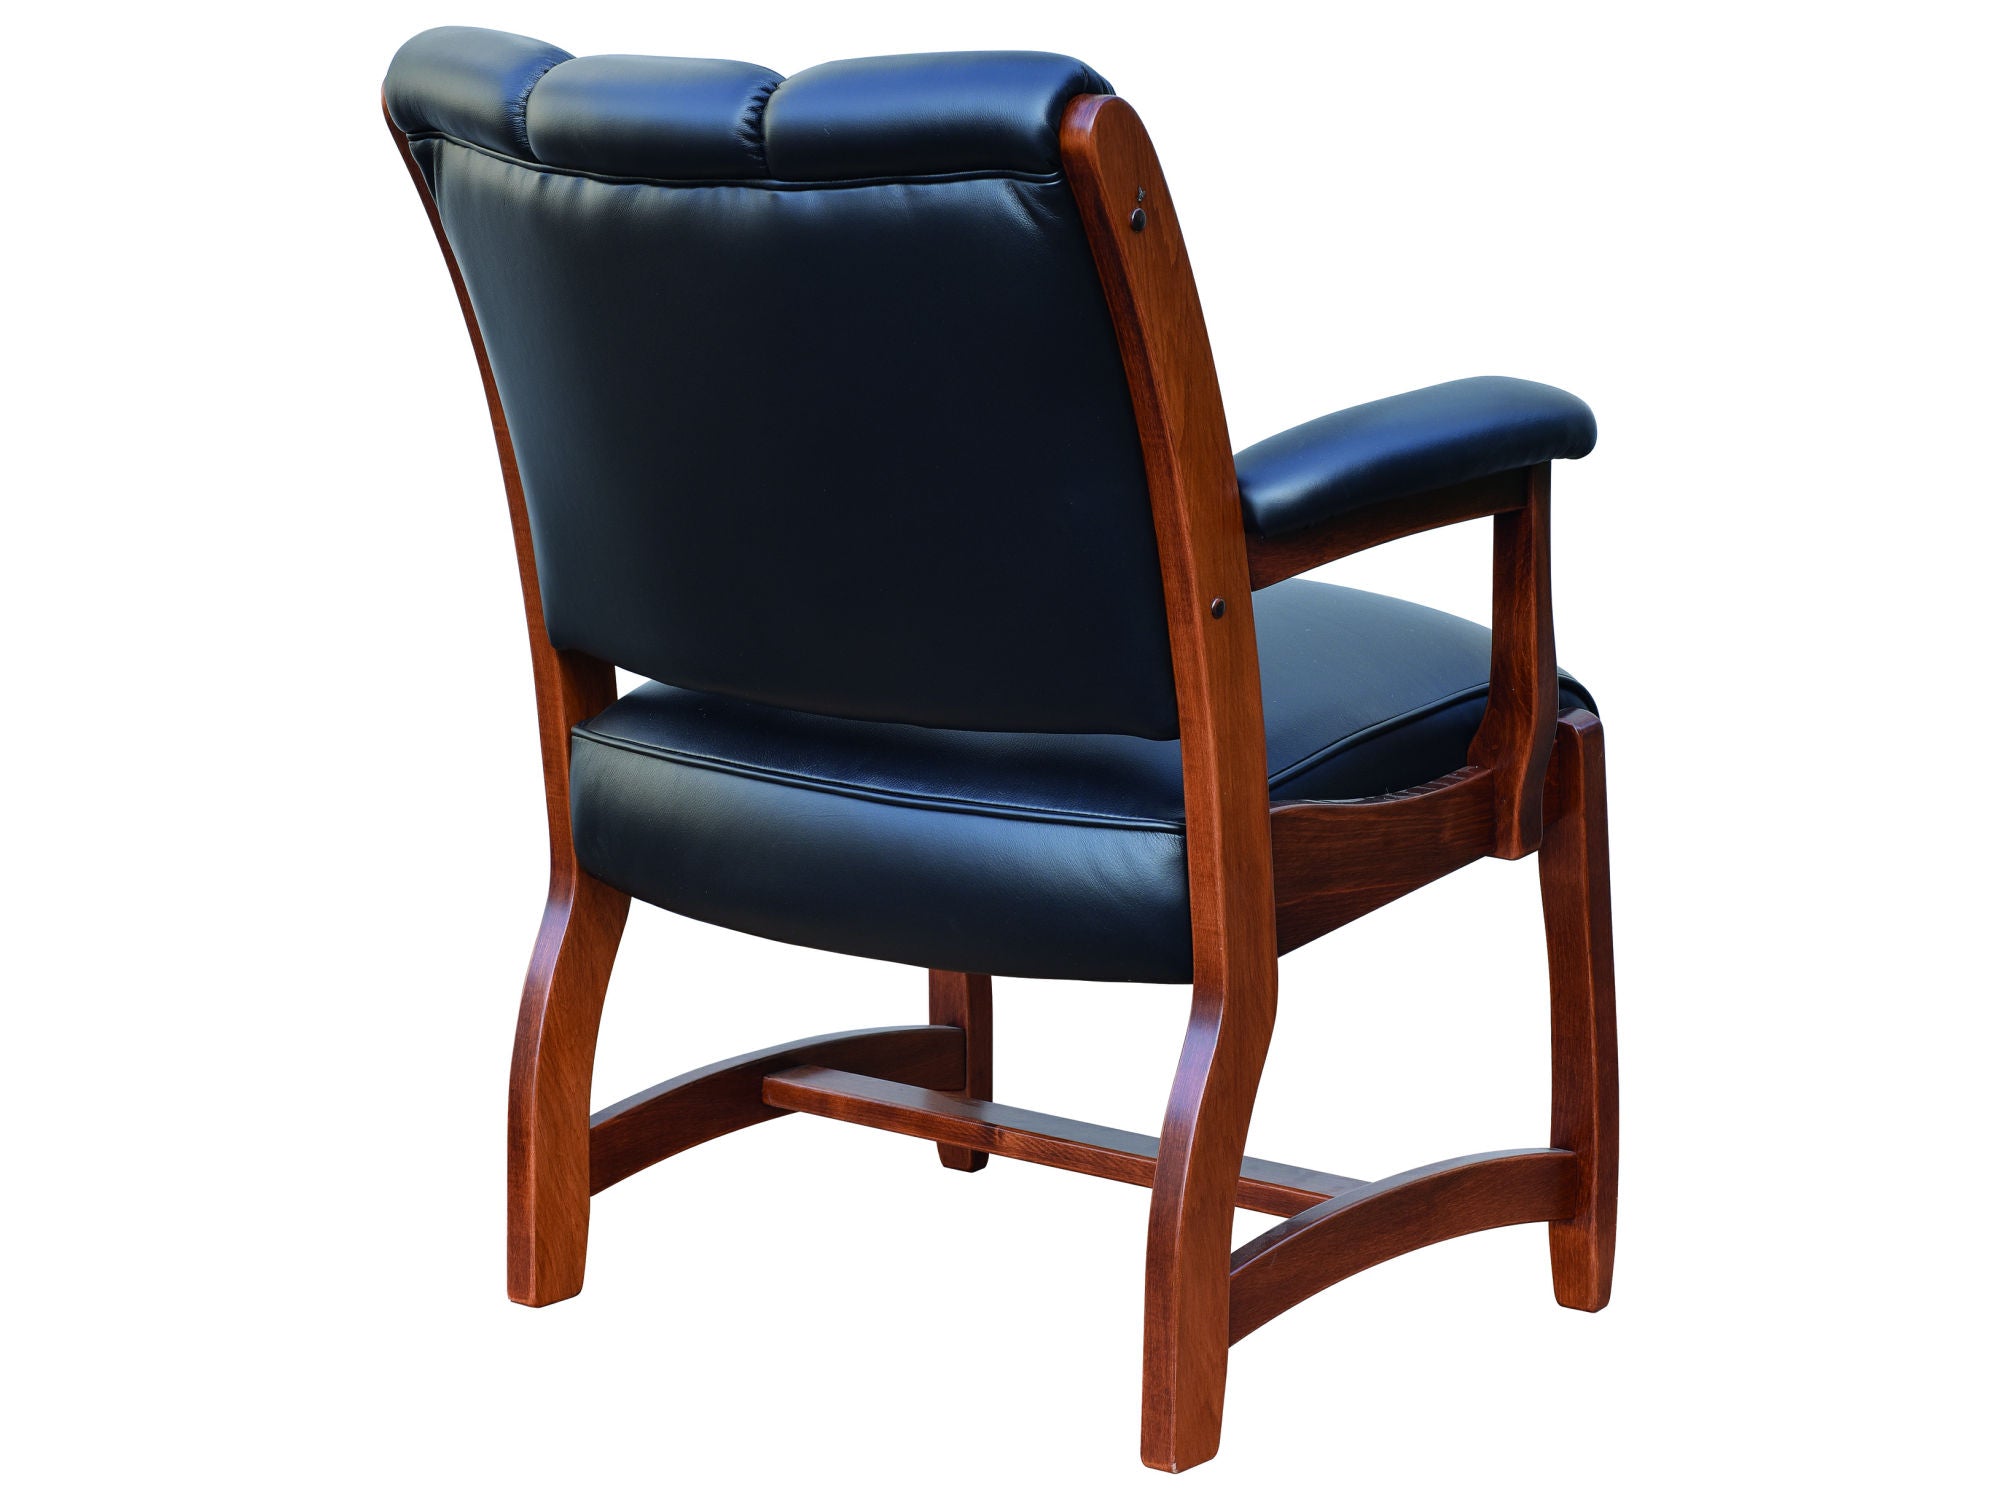 Amish Edelweiss Client Arm Chair